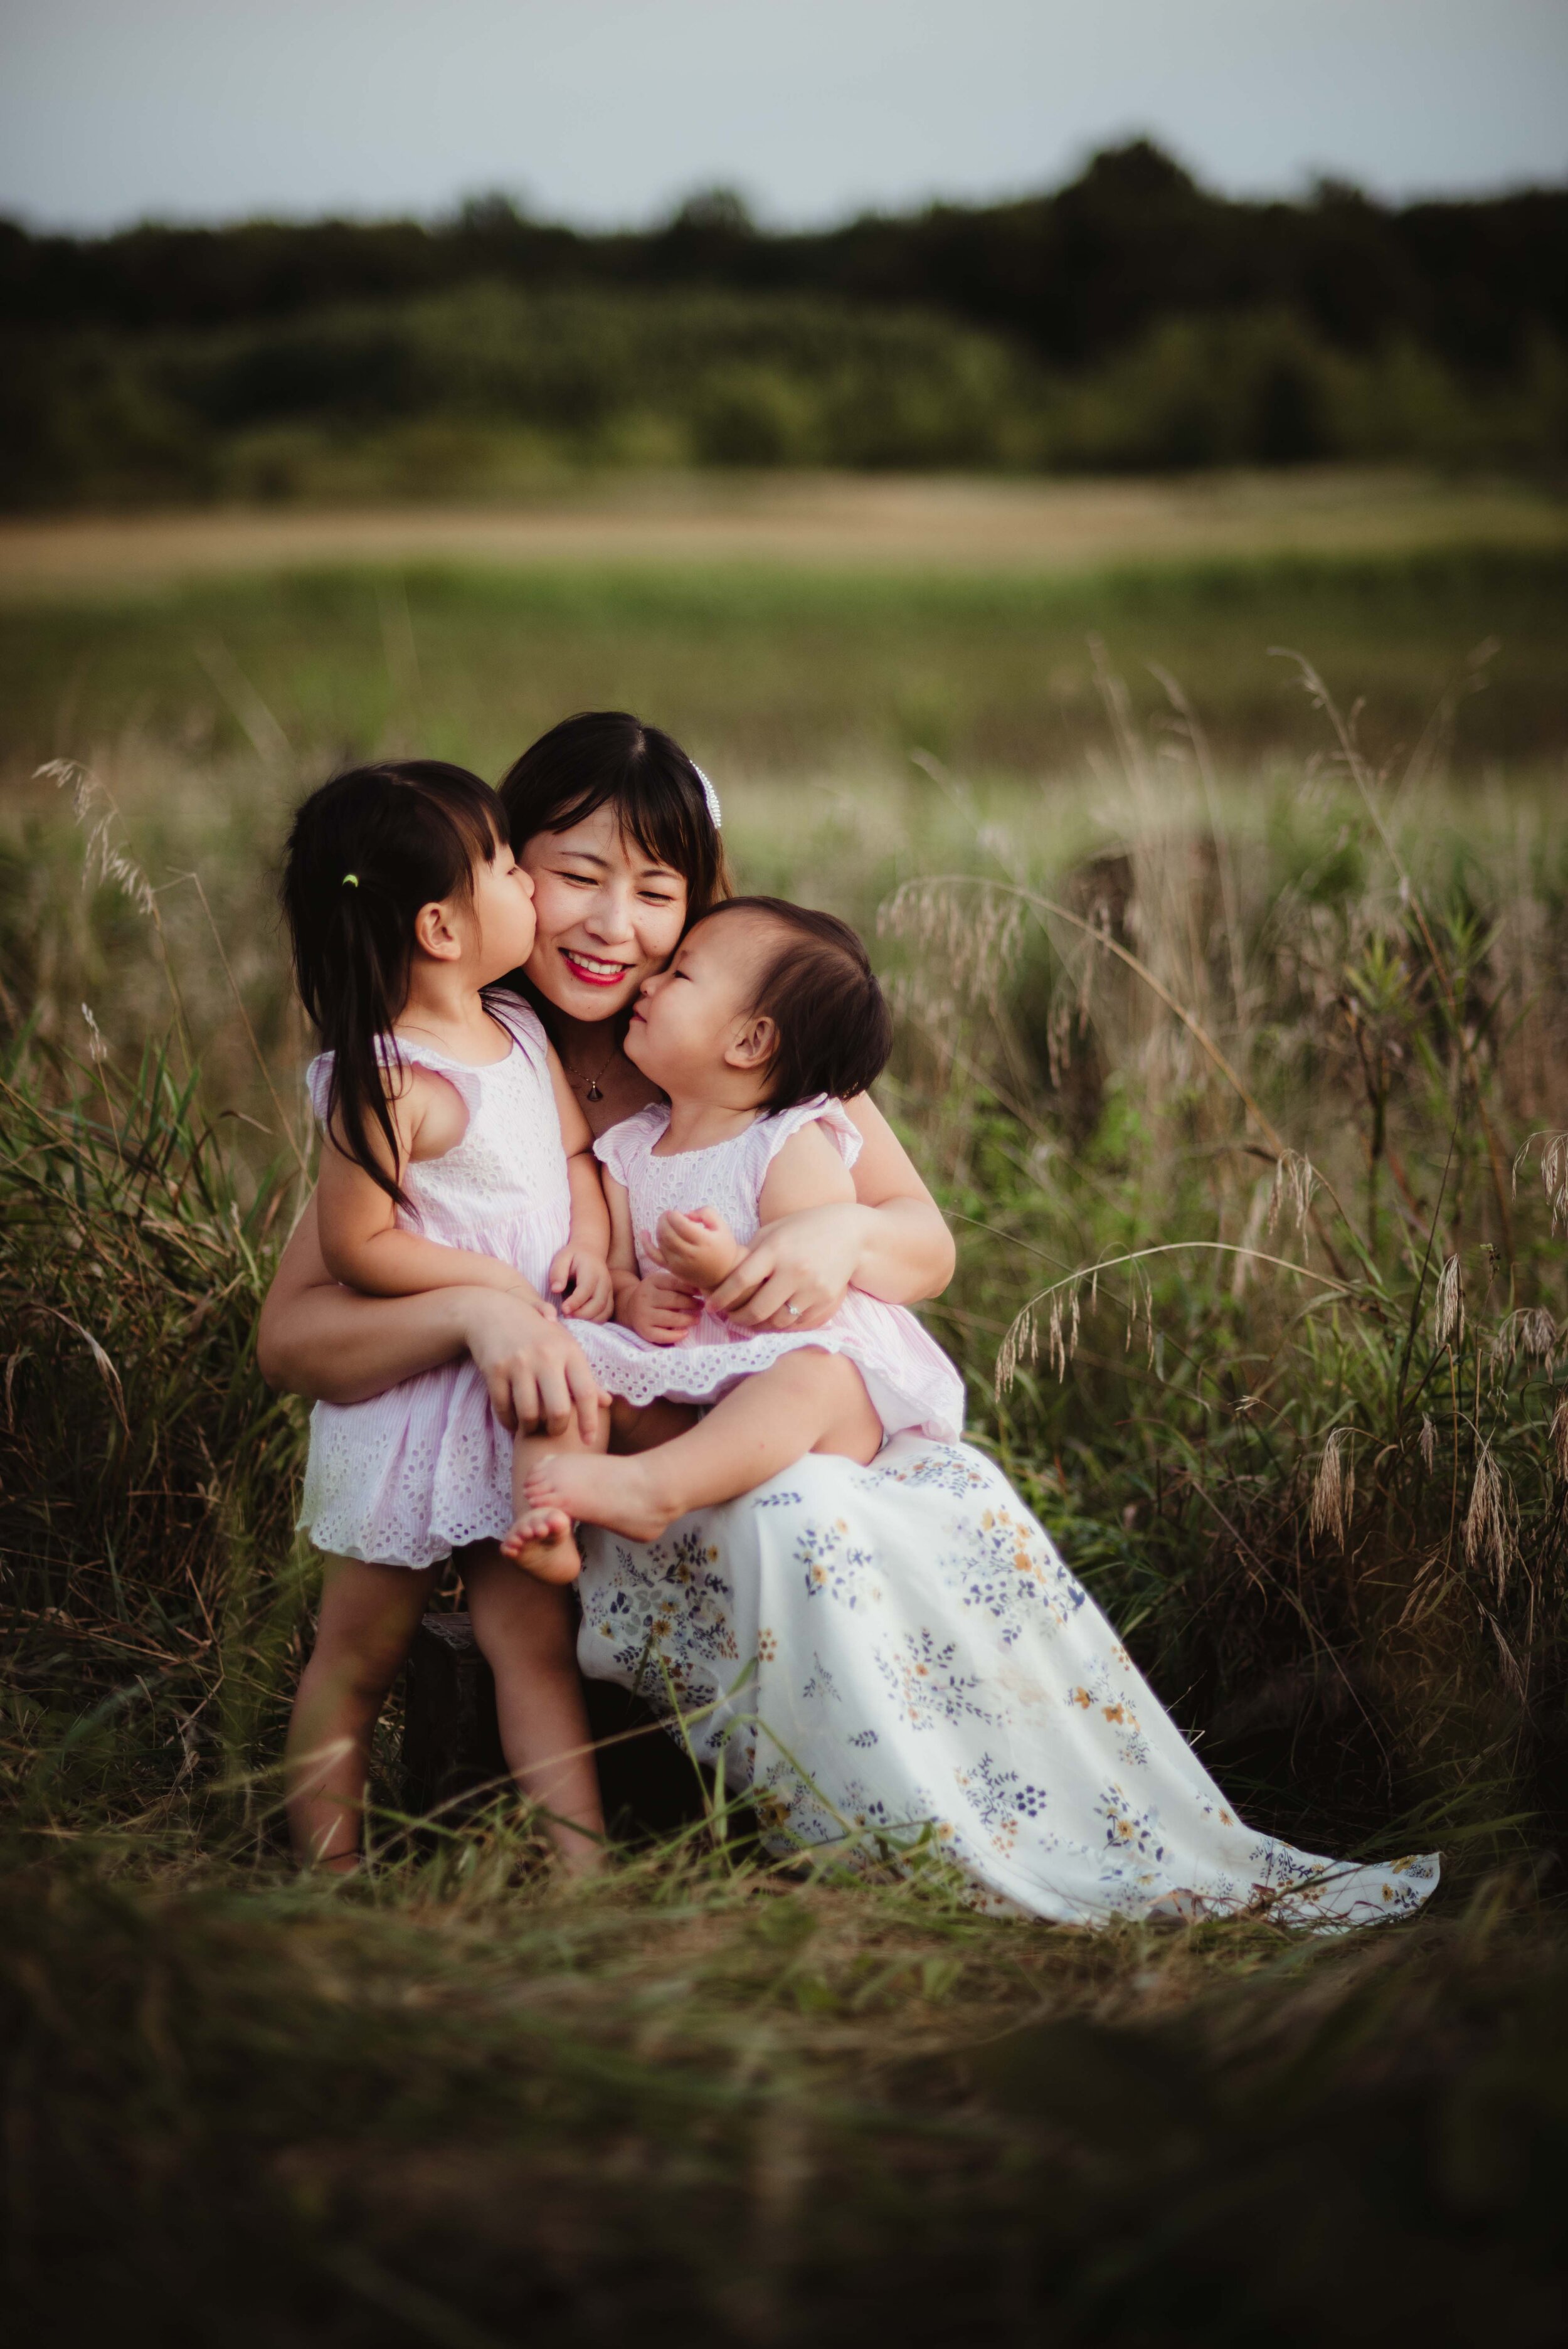 A mother has a sweet moment with her two little daughters in a summer field in West Lafayette, Indiana during their family photo session